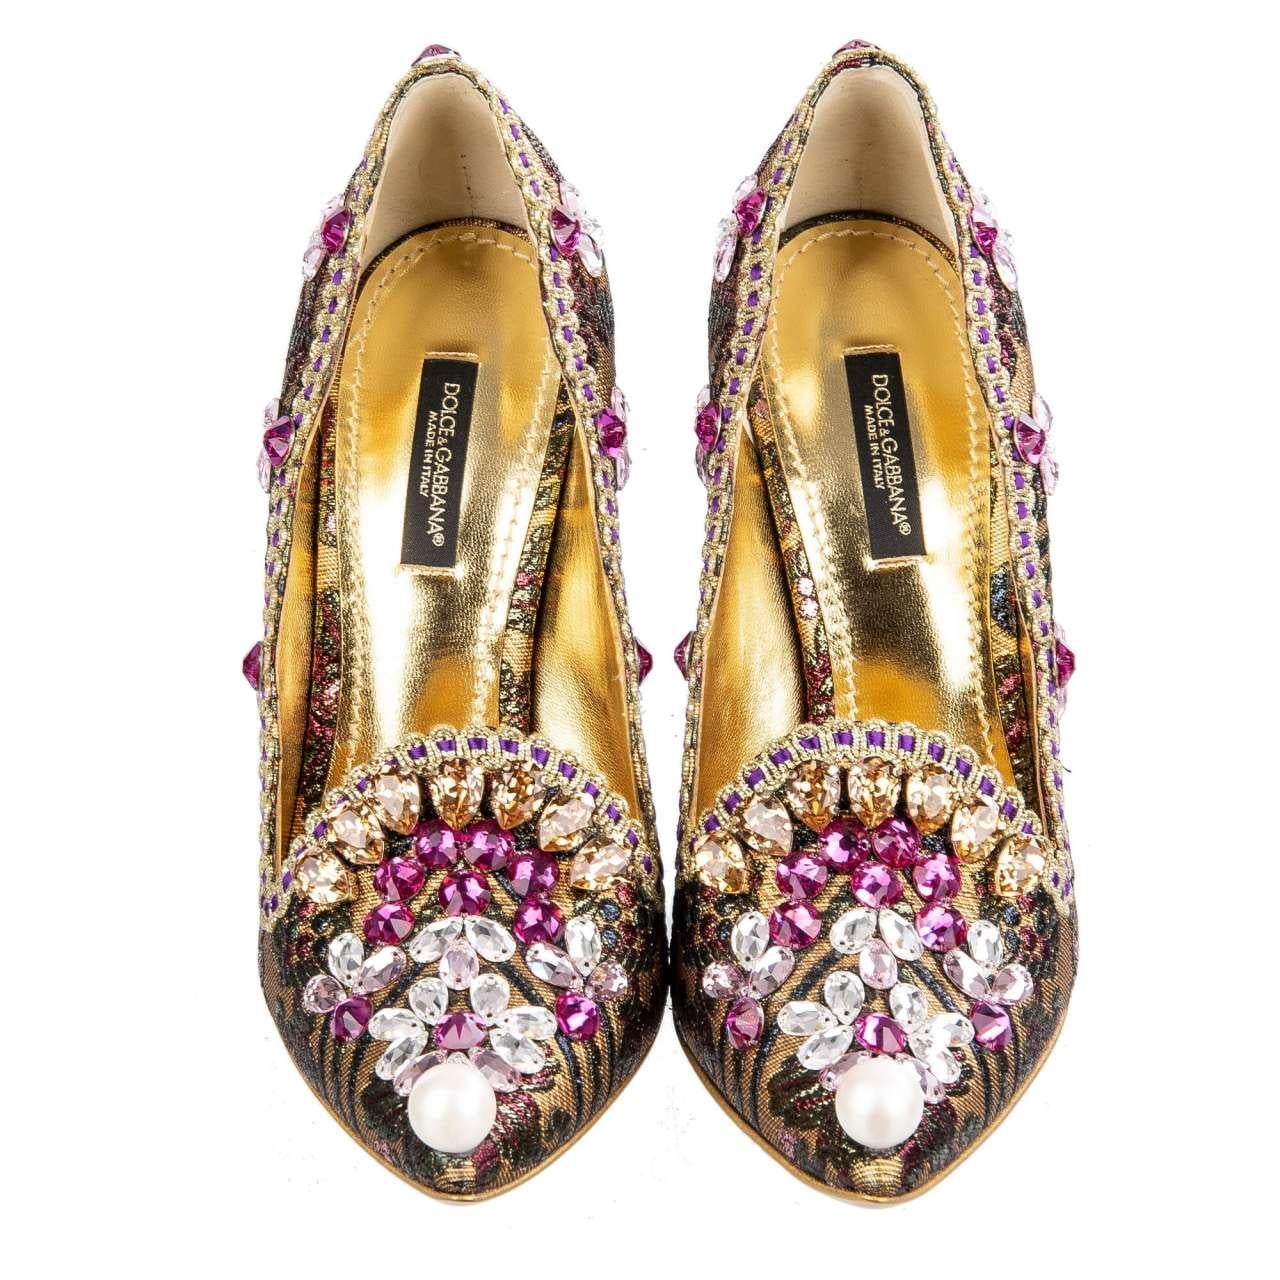 Dolce & Gabbana Lurex Jacquard Crystals Embroidered Pumps ALADINO Gold EUR 36.5 For Sale 1